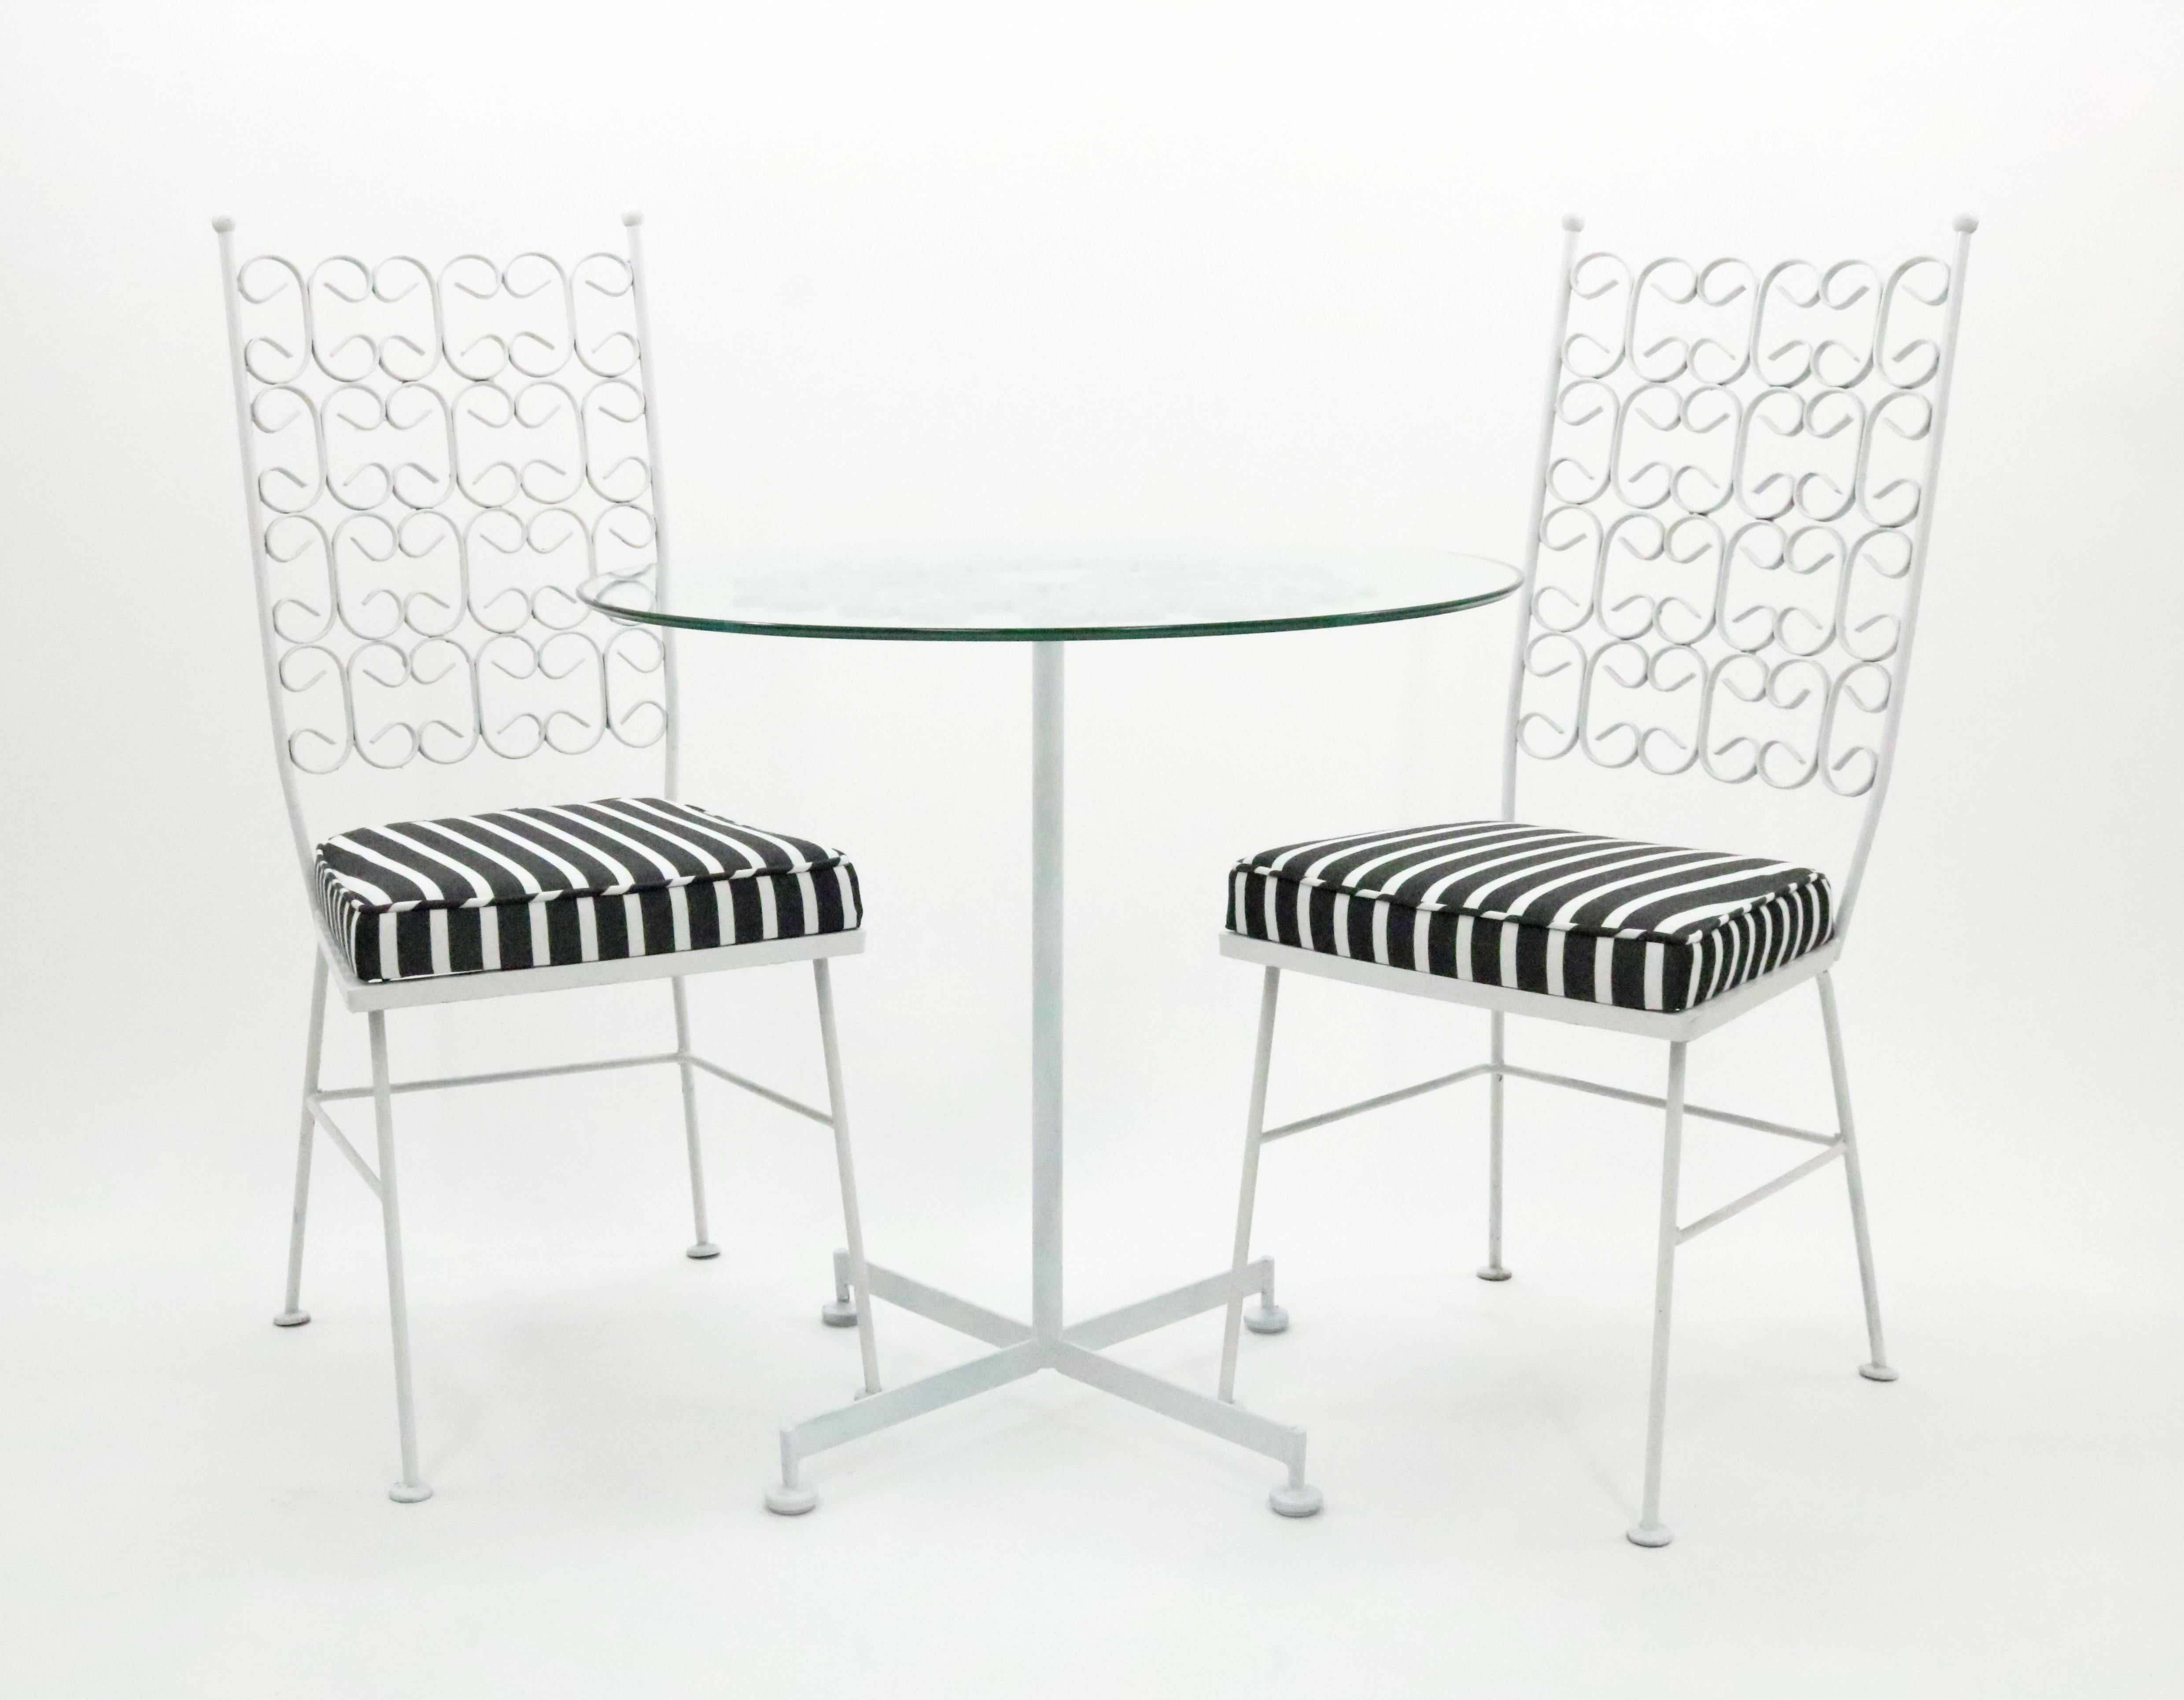 An iconic bistro set by Arthur Umanoff from his Granada Collection for the Boyeur Scott Furniture Co. USA, 1960s.

Wrought iron frames with new black & white café stripe indoor/outdoor seat upholstery and cushion foam - and a new glass table